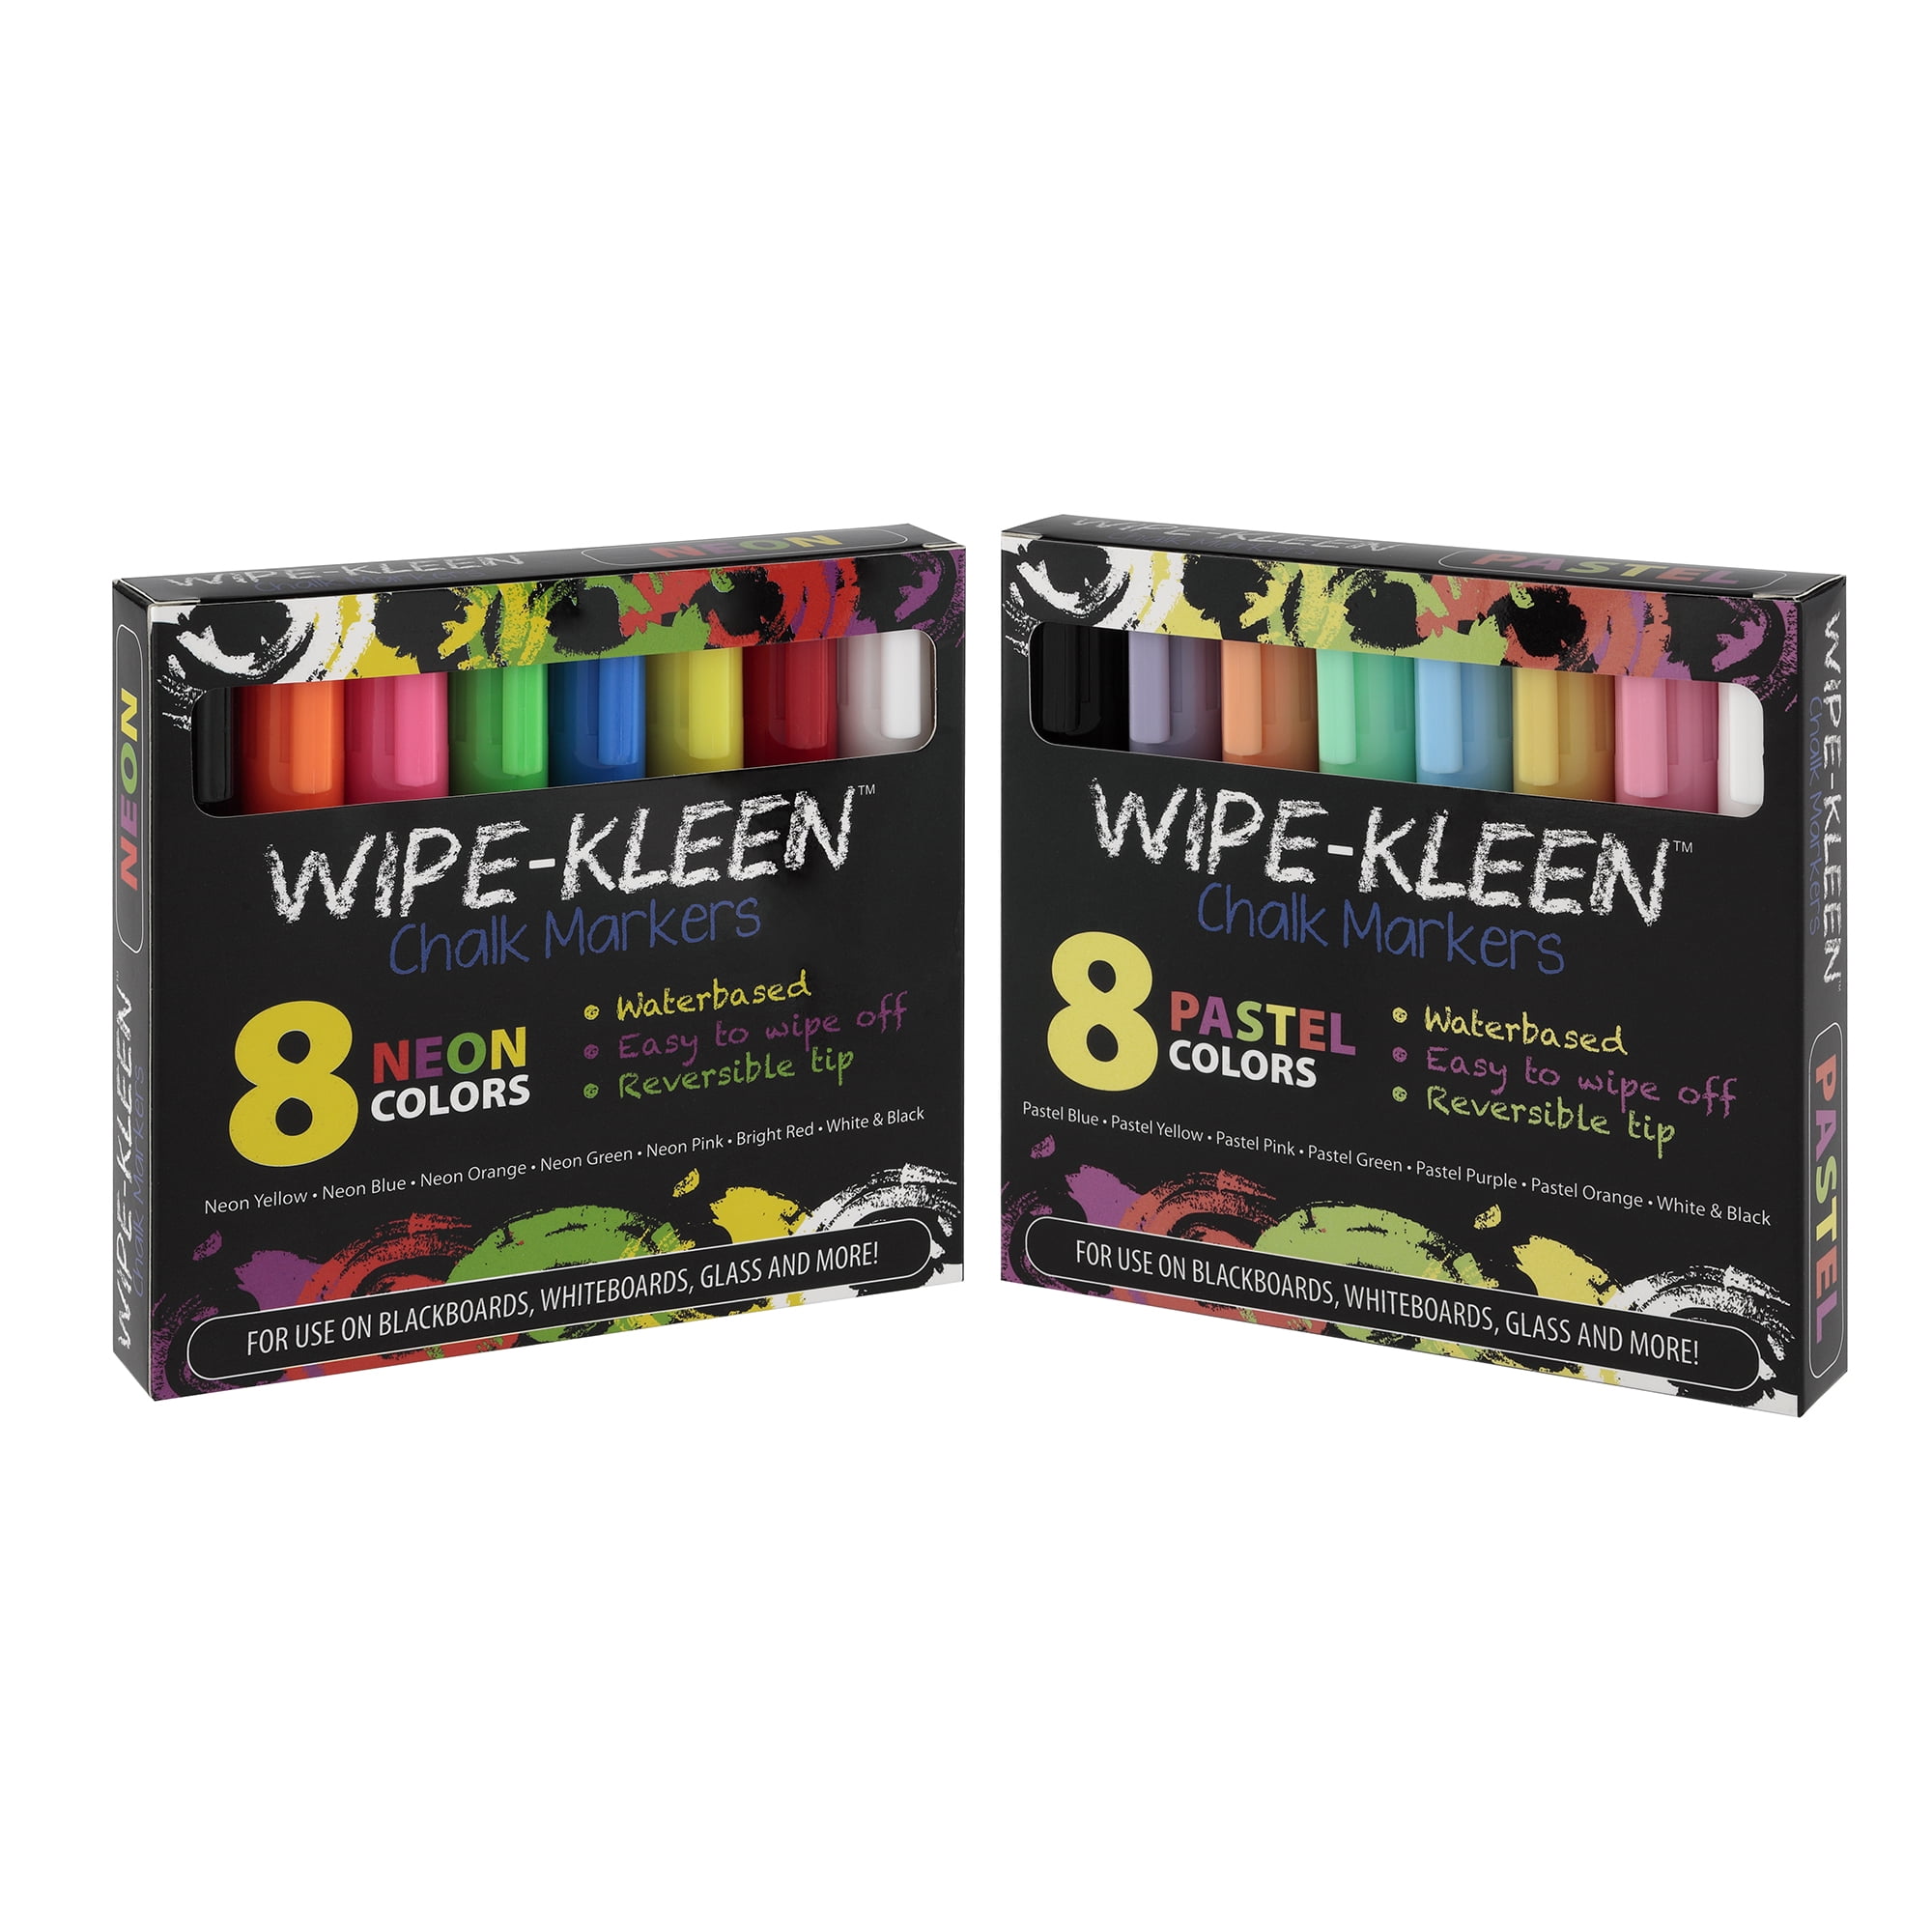 Creative Mark Wipe-Kleen Liquid Chalk Markers Pastel Color- Set of 8 - for  Bistro Signs, Blackboard, Whiteboard & Glass- Reversible Bullet or Chisel